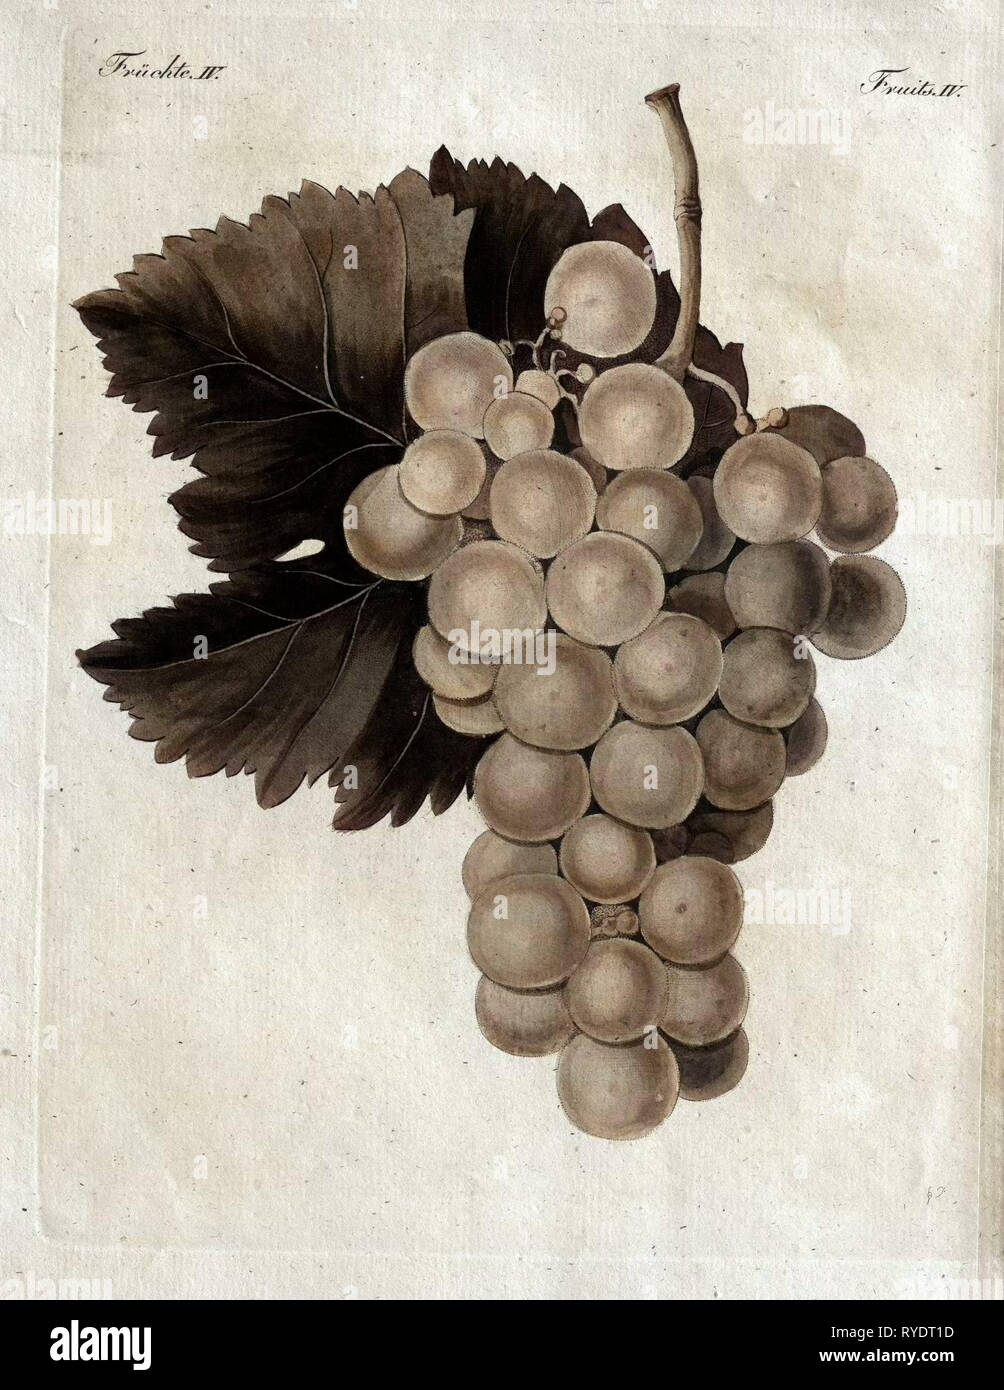 Wine Grapes, Vine, Agriculture, Fruit, Food and Drink, Grape, Plant, Ripe, Season, Natural, Viticulture, Seasonal, Taste, Juicy, Organic, 19th Century, 1800s, 1900s, Fruits, Liszt Gourmet Archive Stock Photo